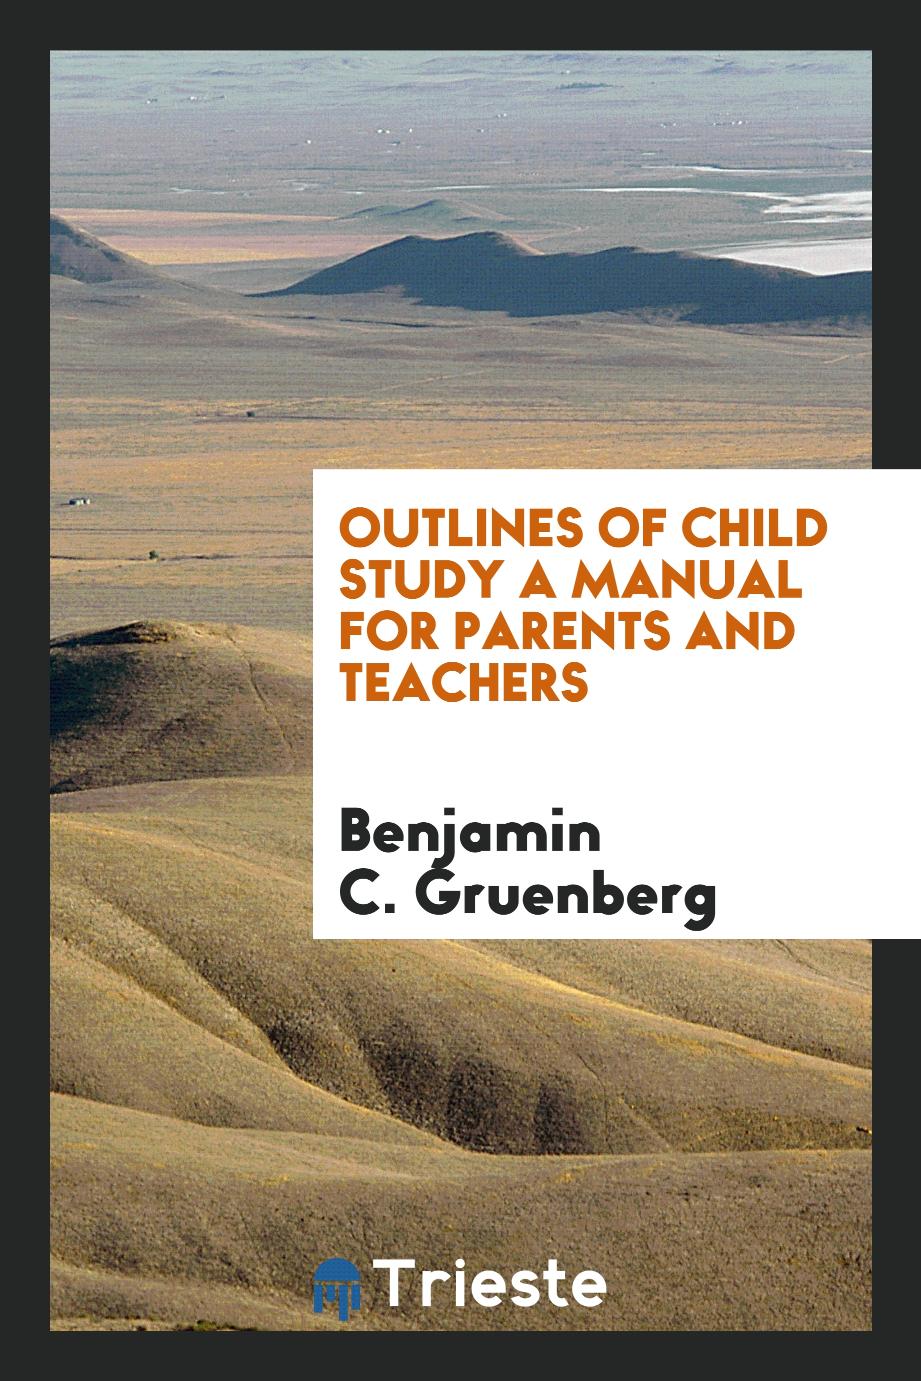 Outlines of child study A manual for Parents and Teachers